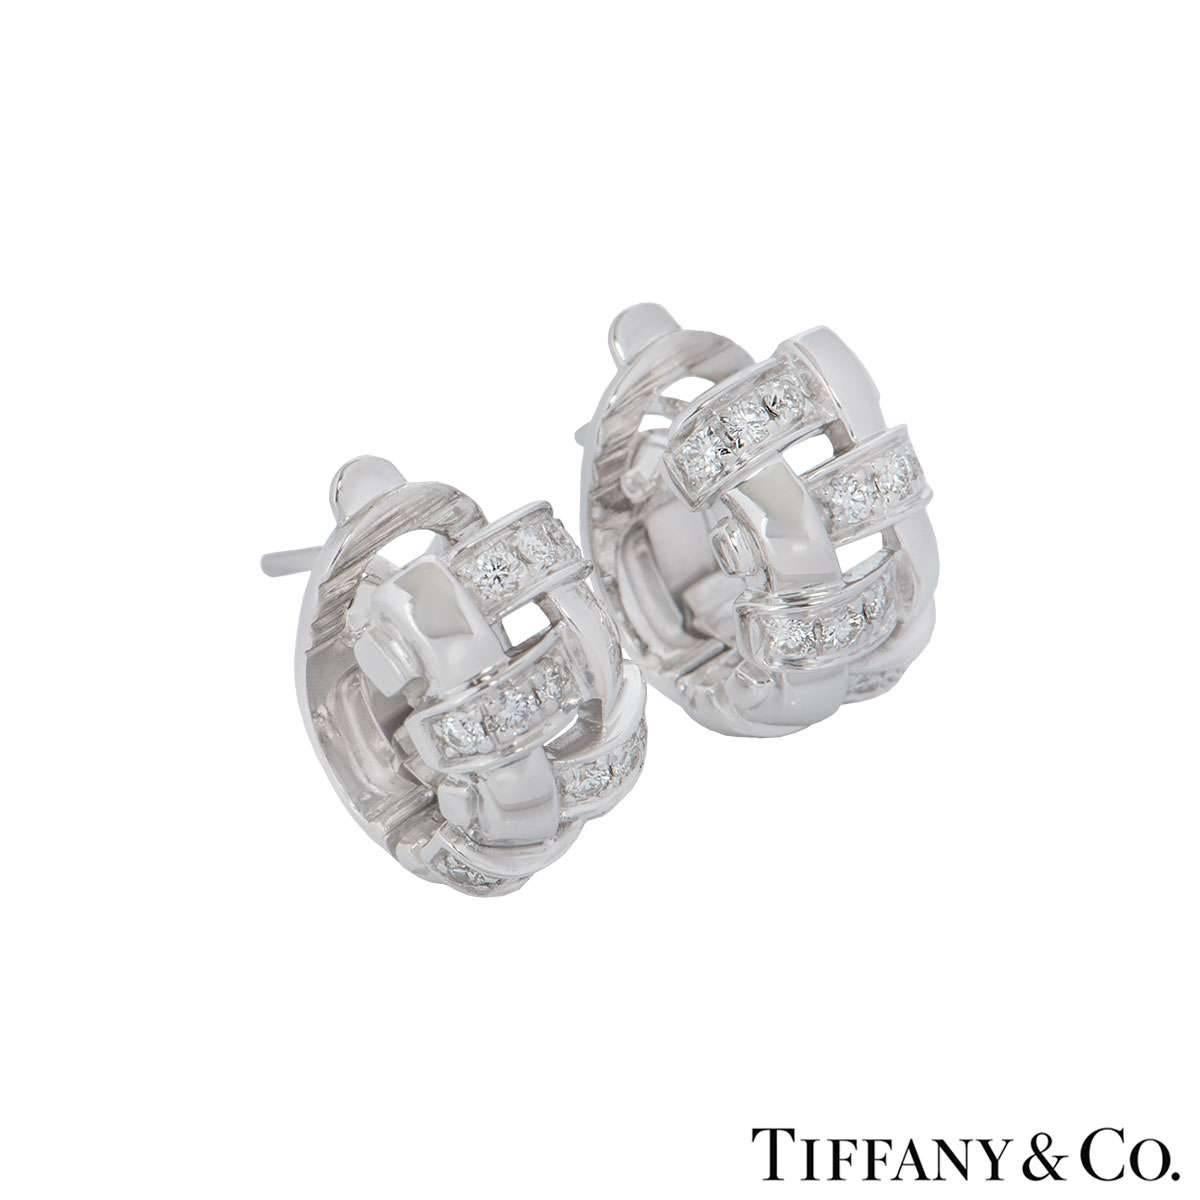 An shimmery pair of 18k white gold Tiffany & Co. lattice earrings. Each earring compromises of 12 round brilliant cut diamonds with a total weight of 0.48ct, predominantly F-G in colour and VS+ clarity. The earrings feature a post with a